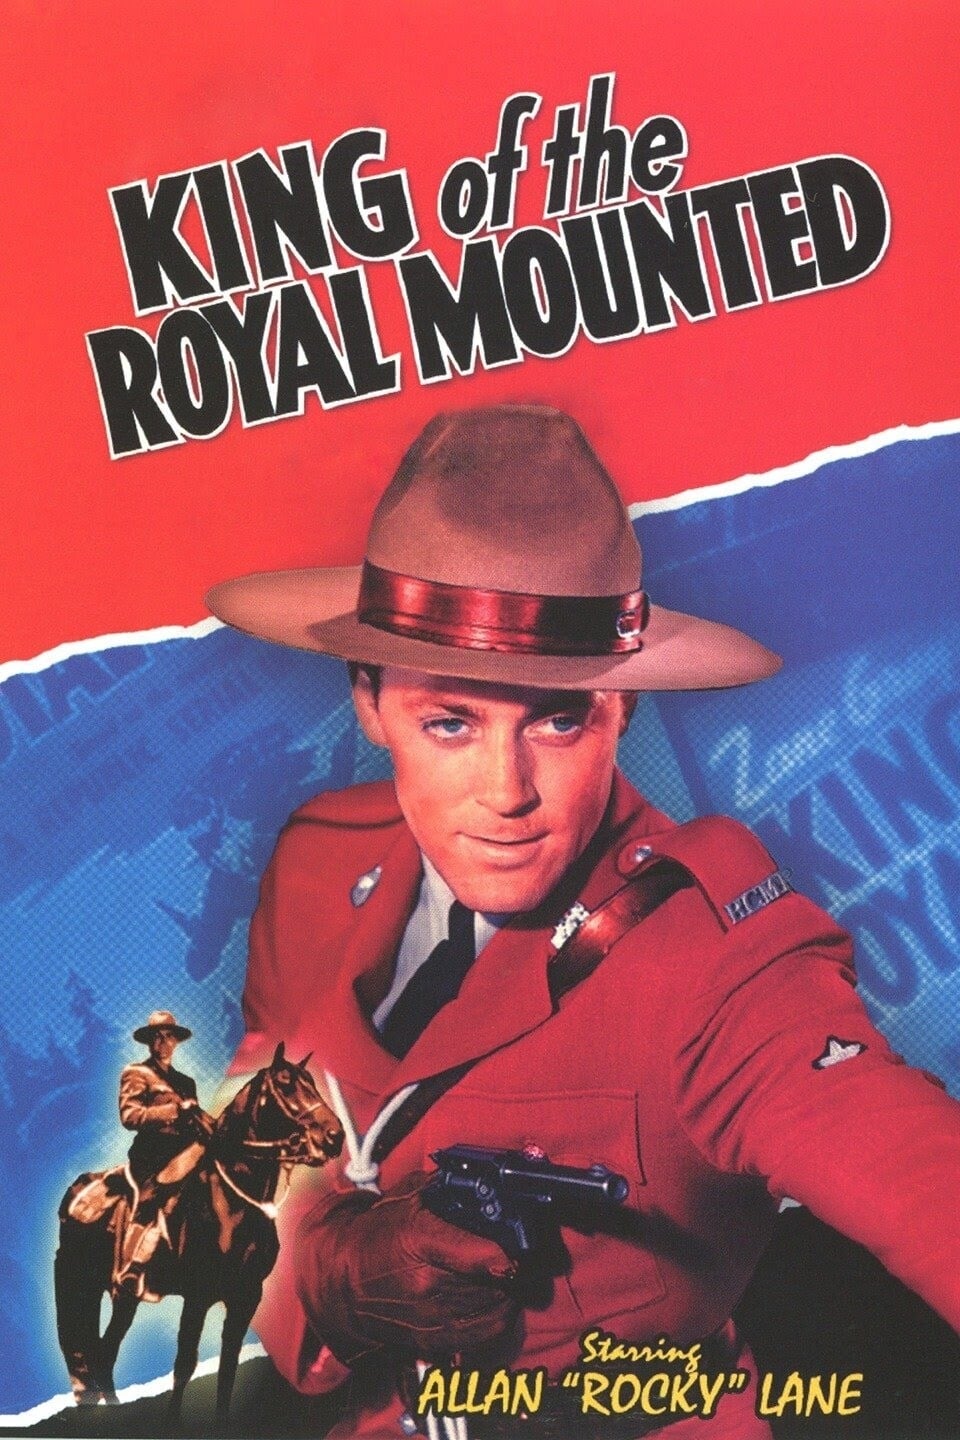 King of the Royal Mounted (1940)